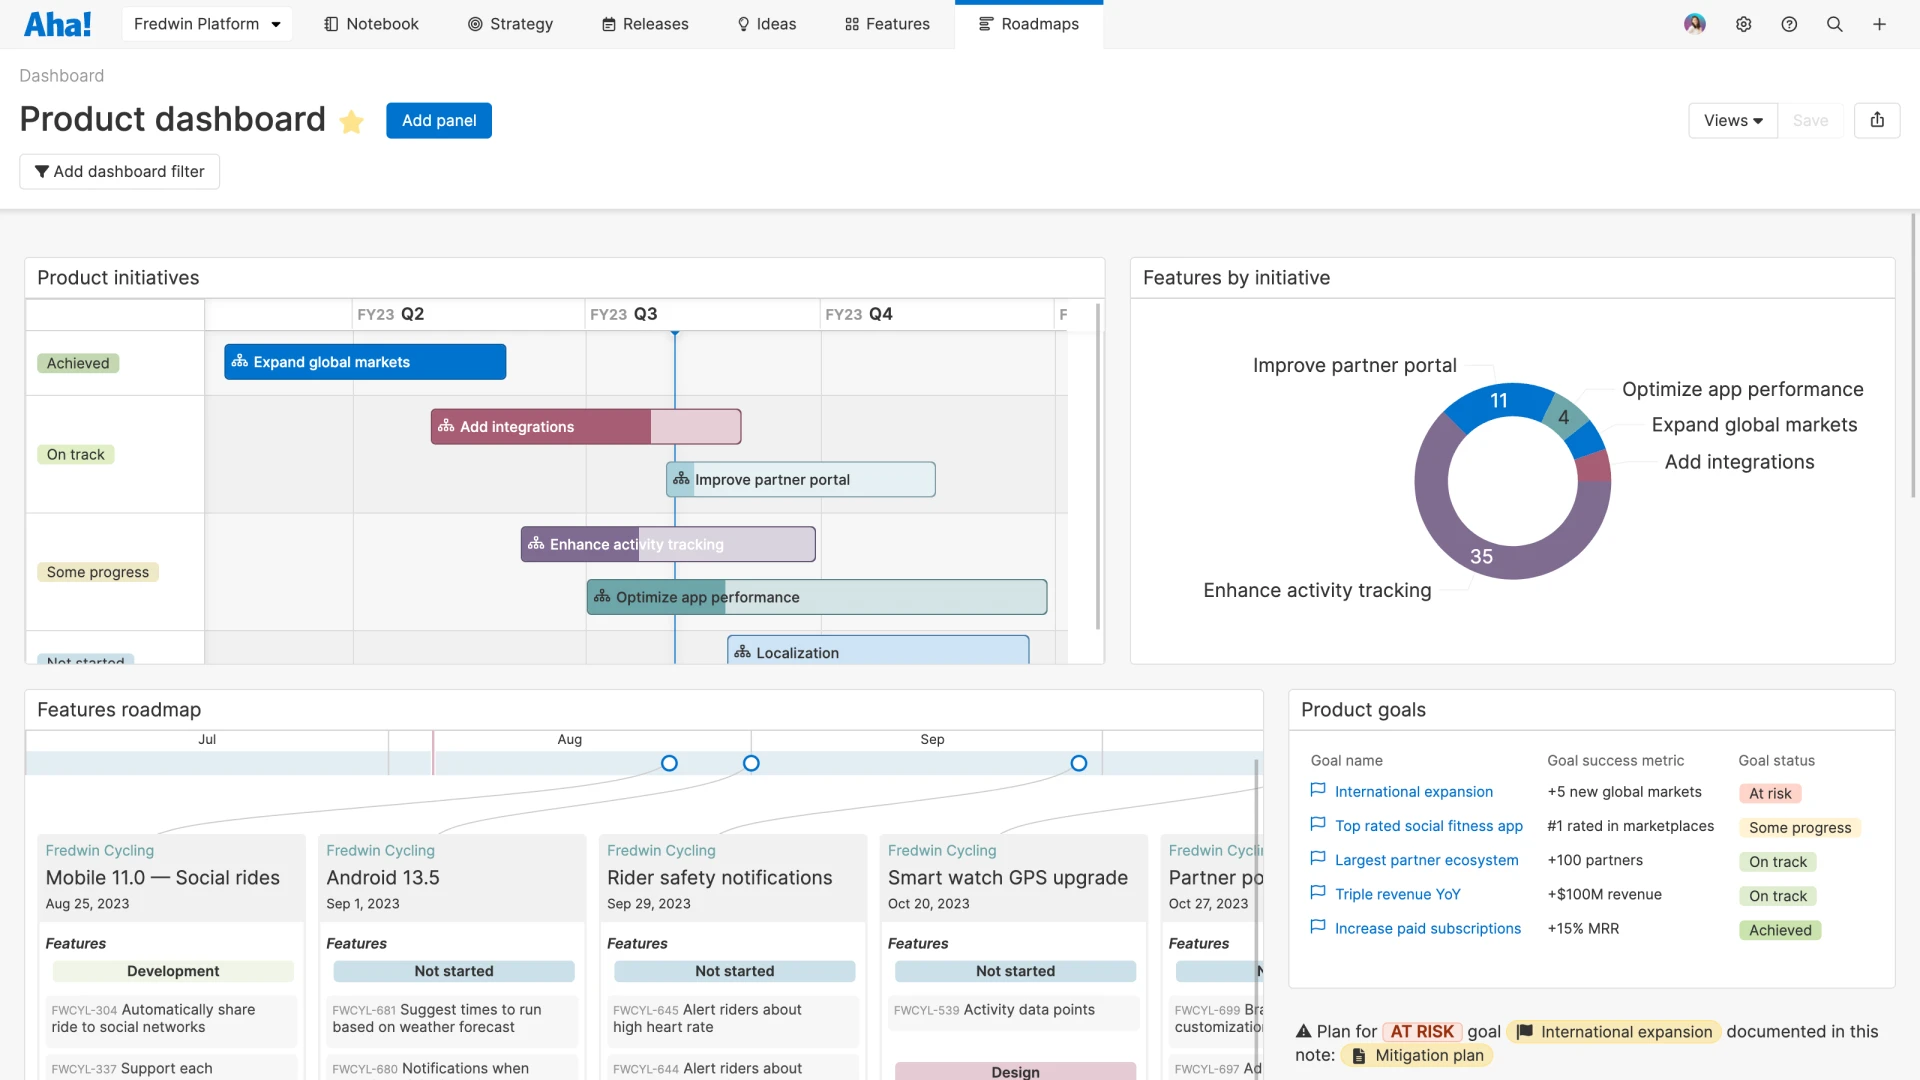 A product dashboard in Aha! software